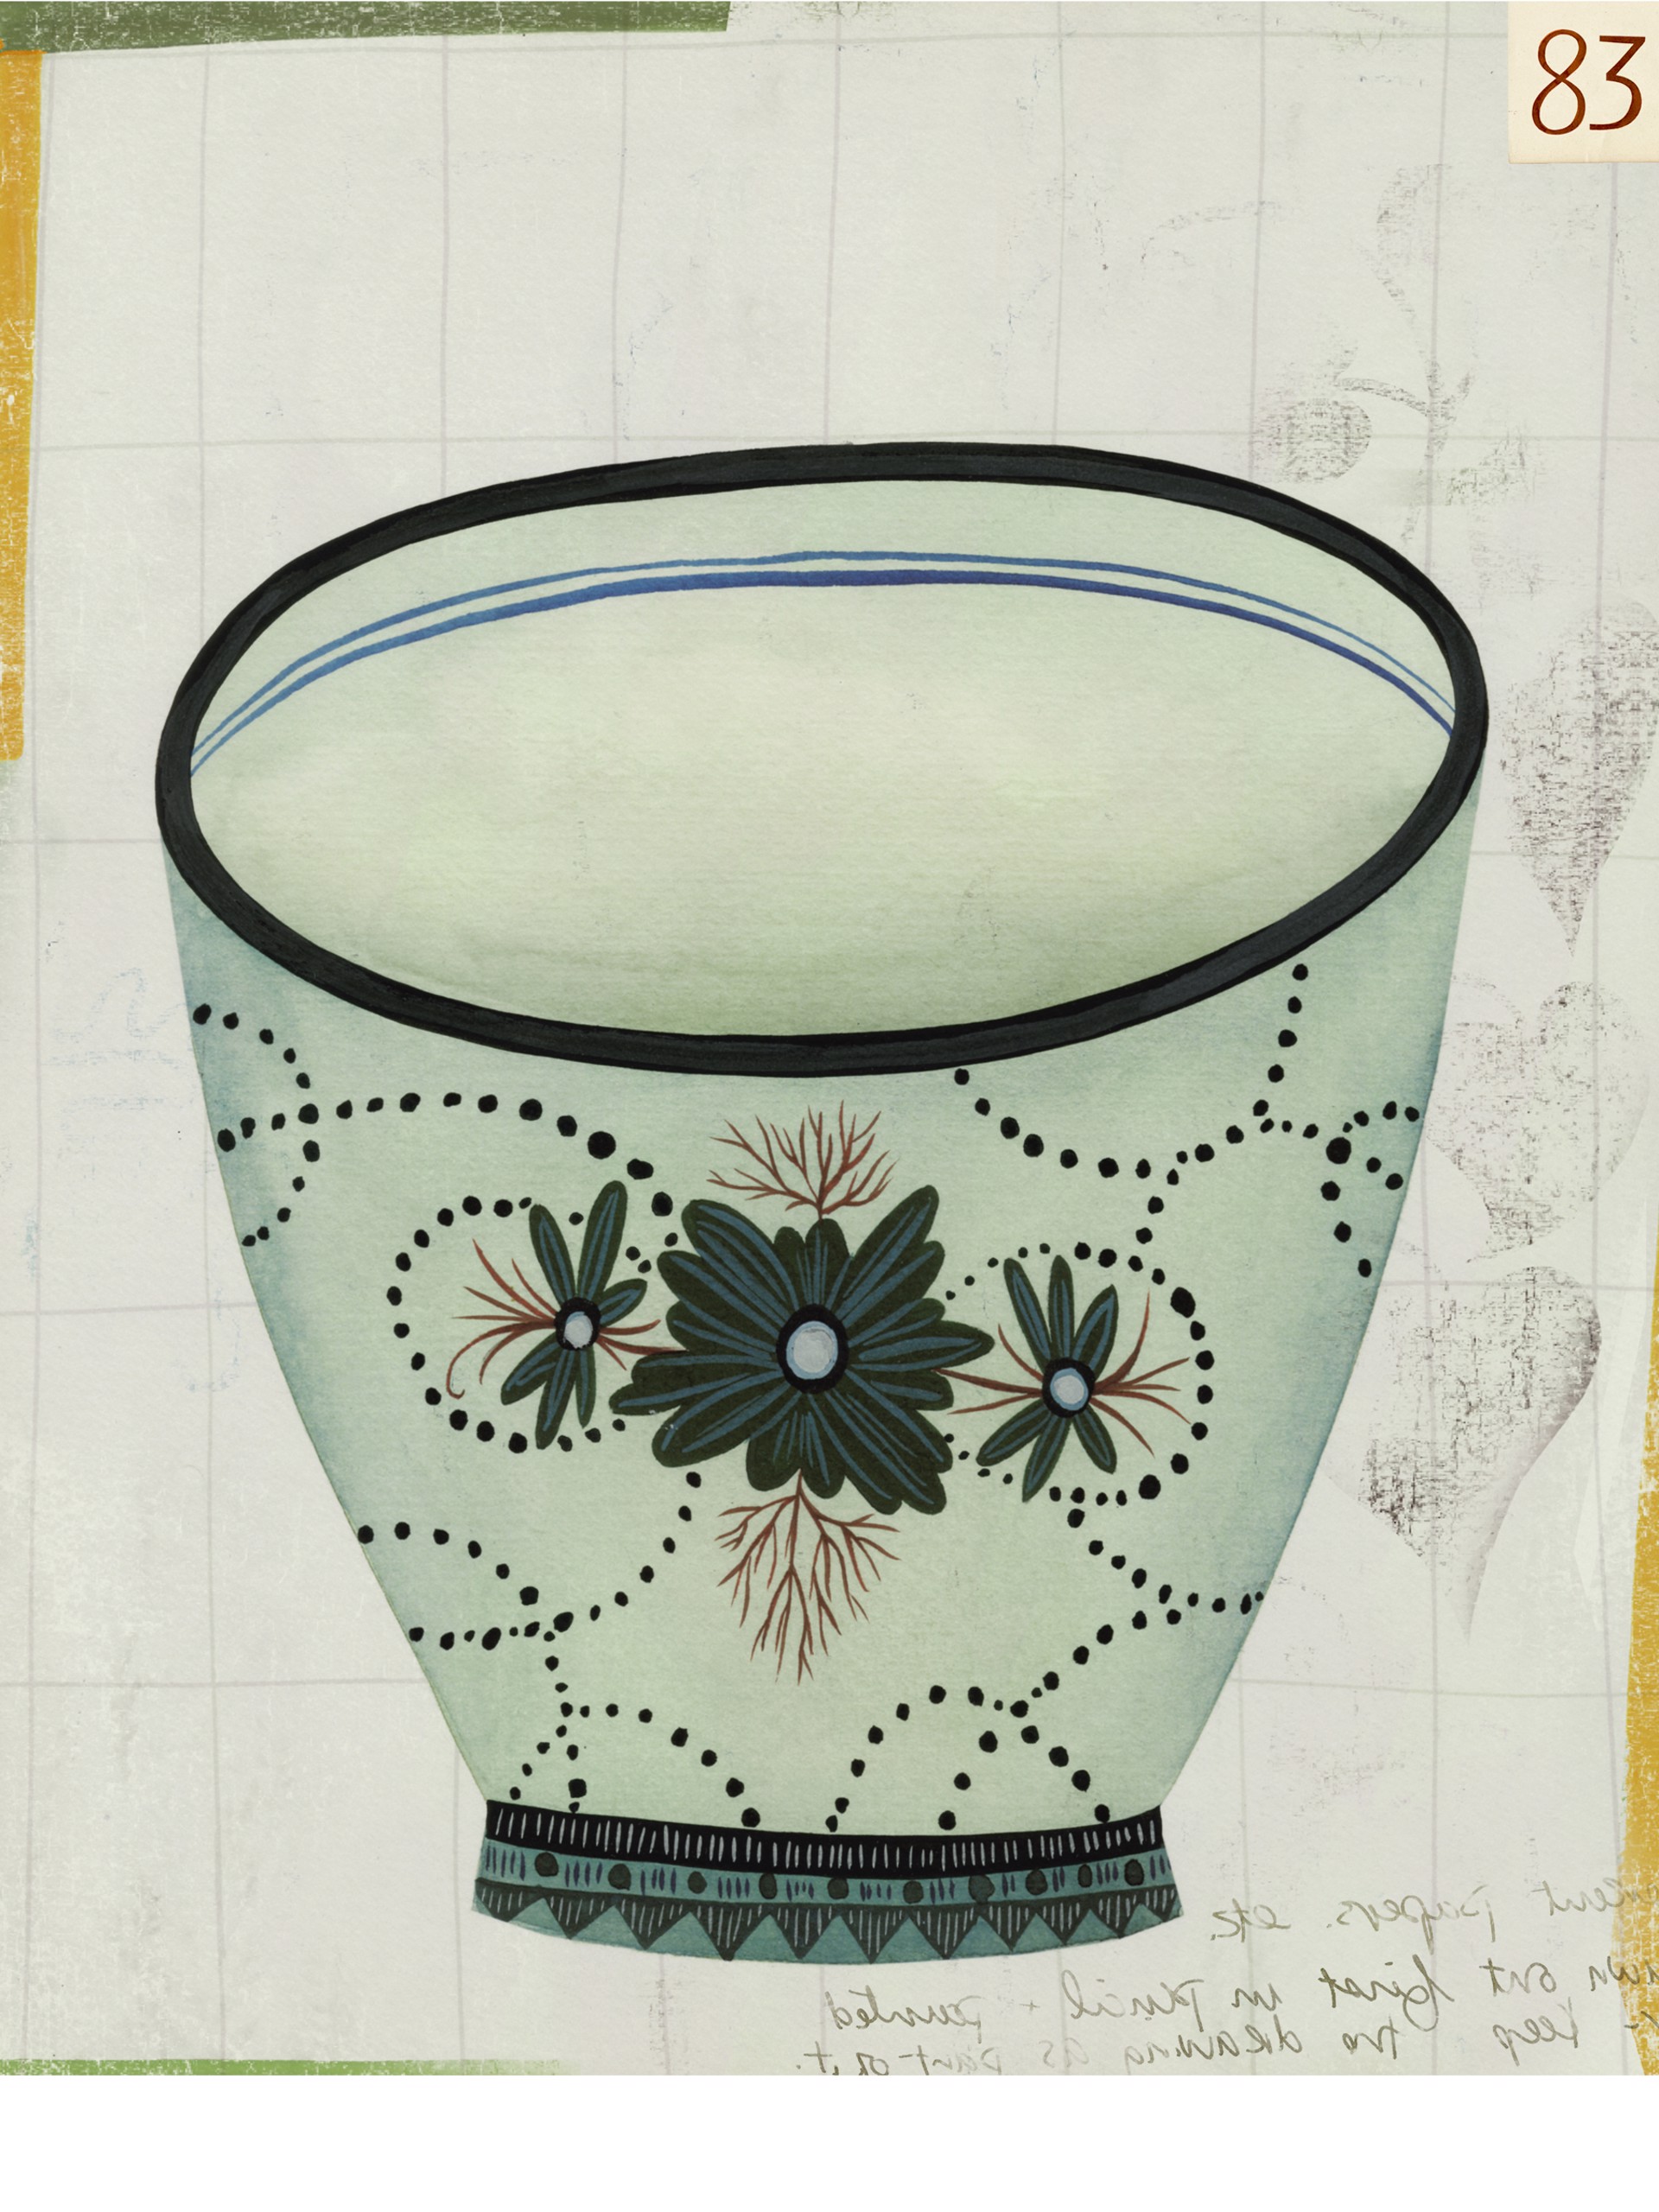 Cup No. 83 by Anne Smith